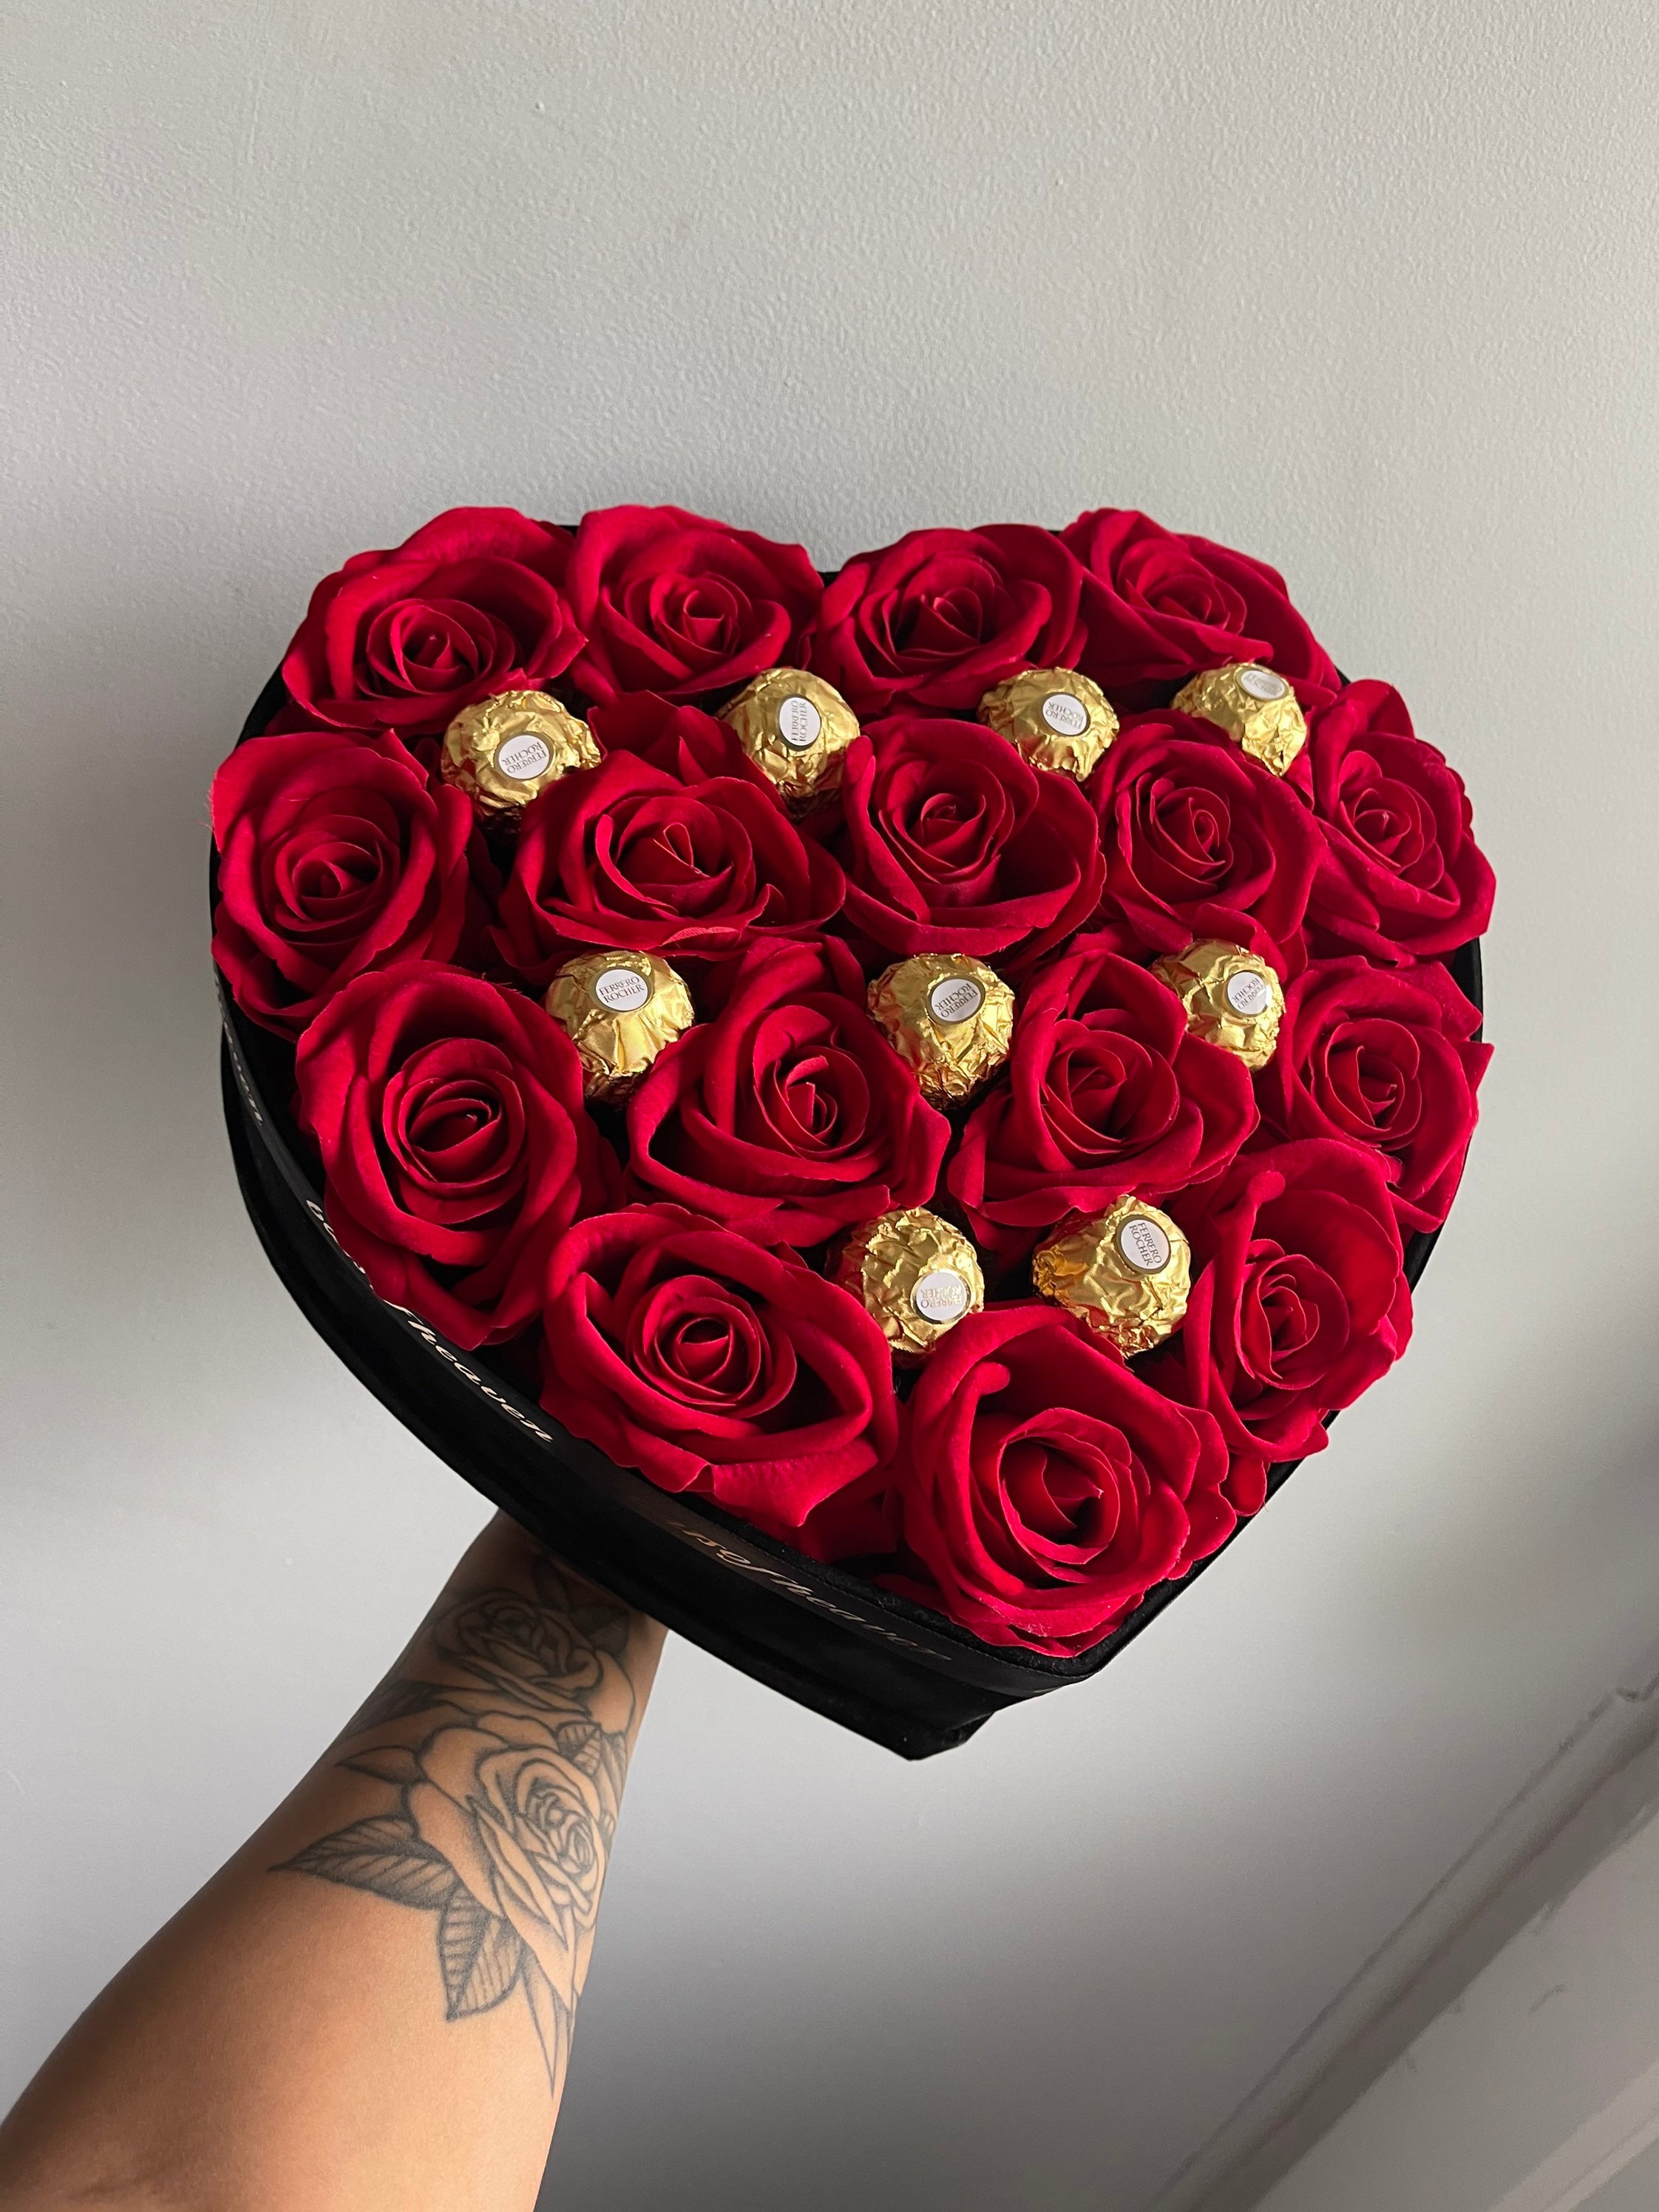 Luxurious pink and red roses in heart shaped box.Valentine's day flowers.  Flowers. Anniversary flowers. Birthday flowers. Valentine's day gifts.  Bespoke flower arrangements. Cute gifts for her. Luxurious flowers.Red roses.  100 red roses.